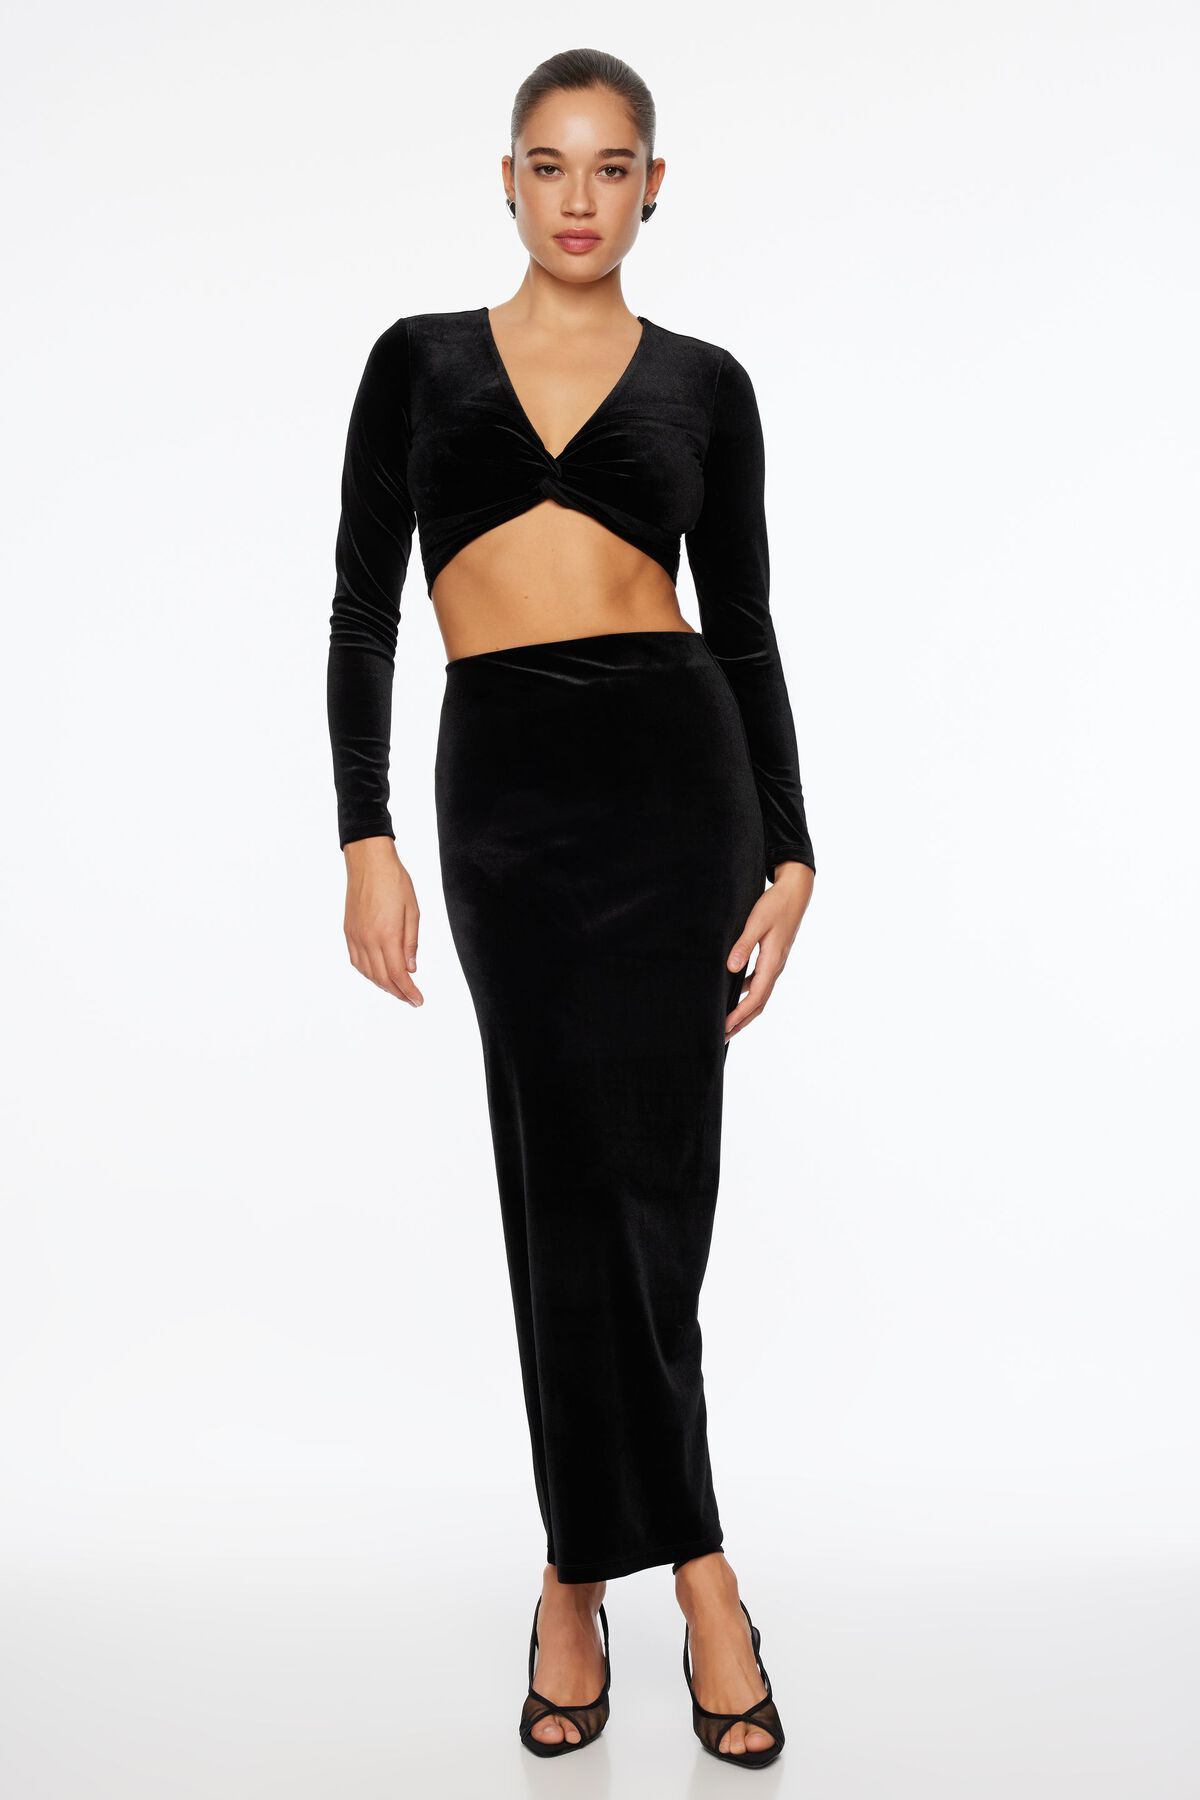 Crop Tops For Women Going Out Women's V Neck Velvet With Breast